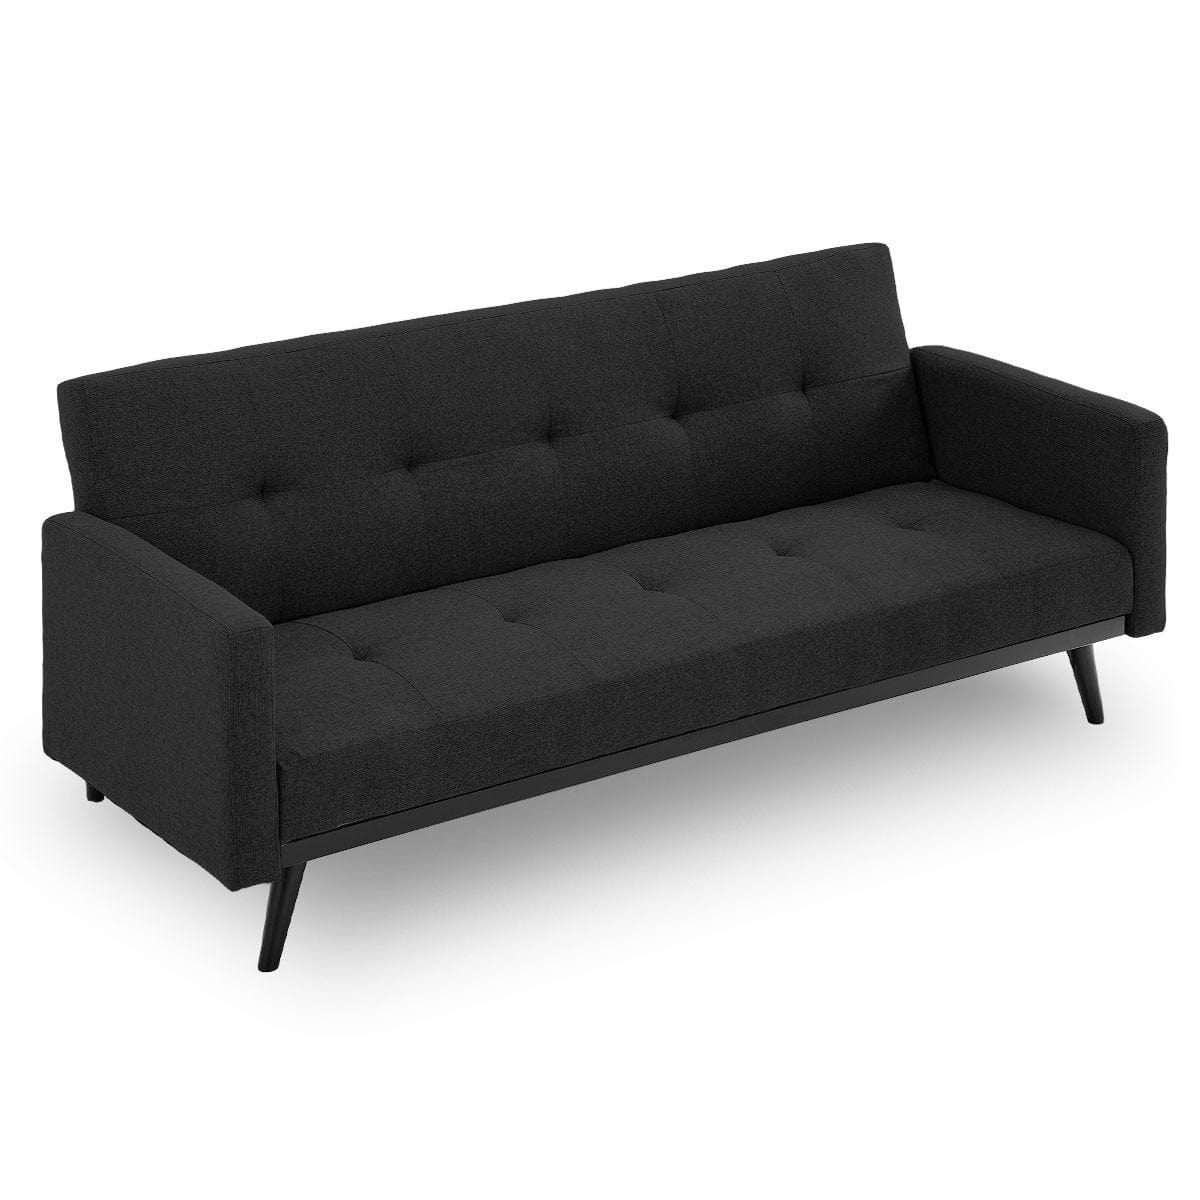 Tufted Faux Linen 3-Seater Sofa Bed With Armrests - Black